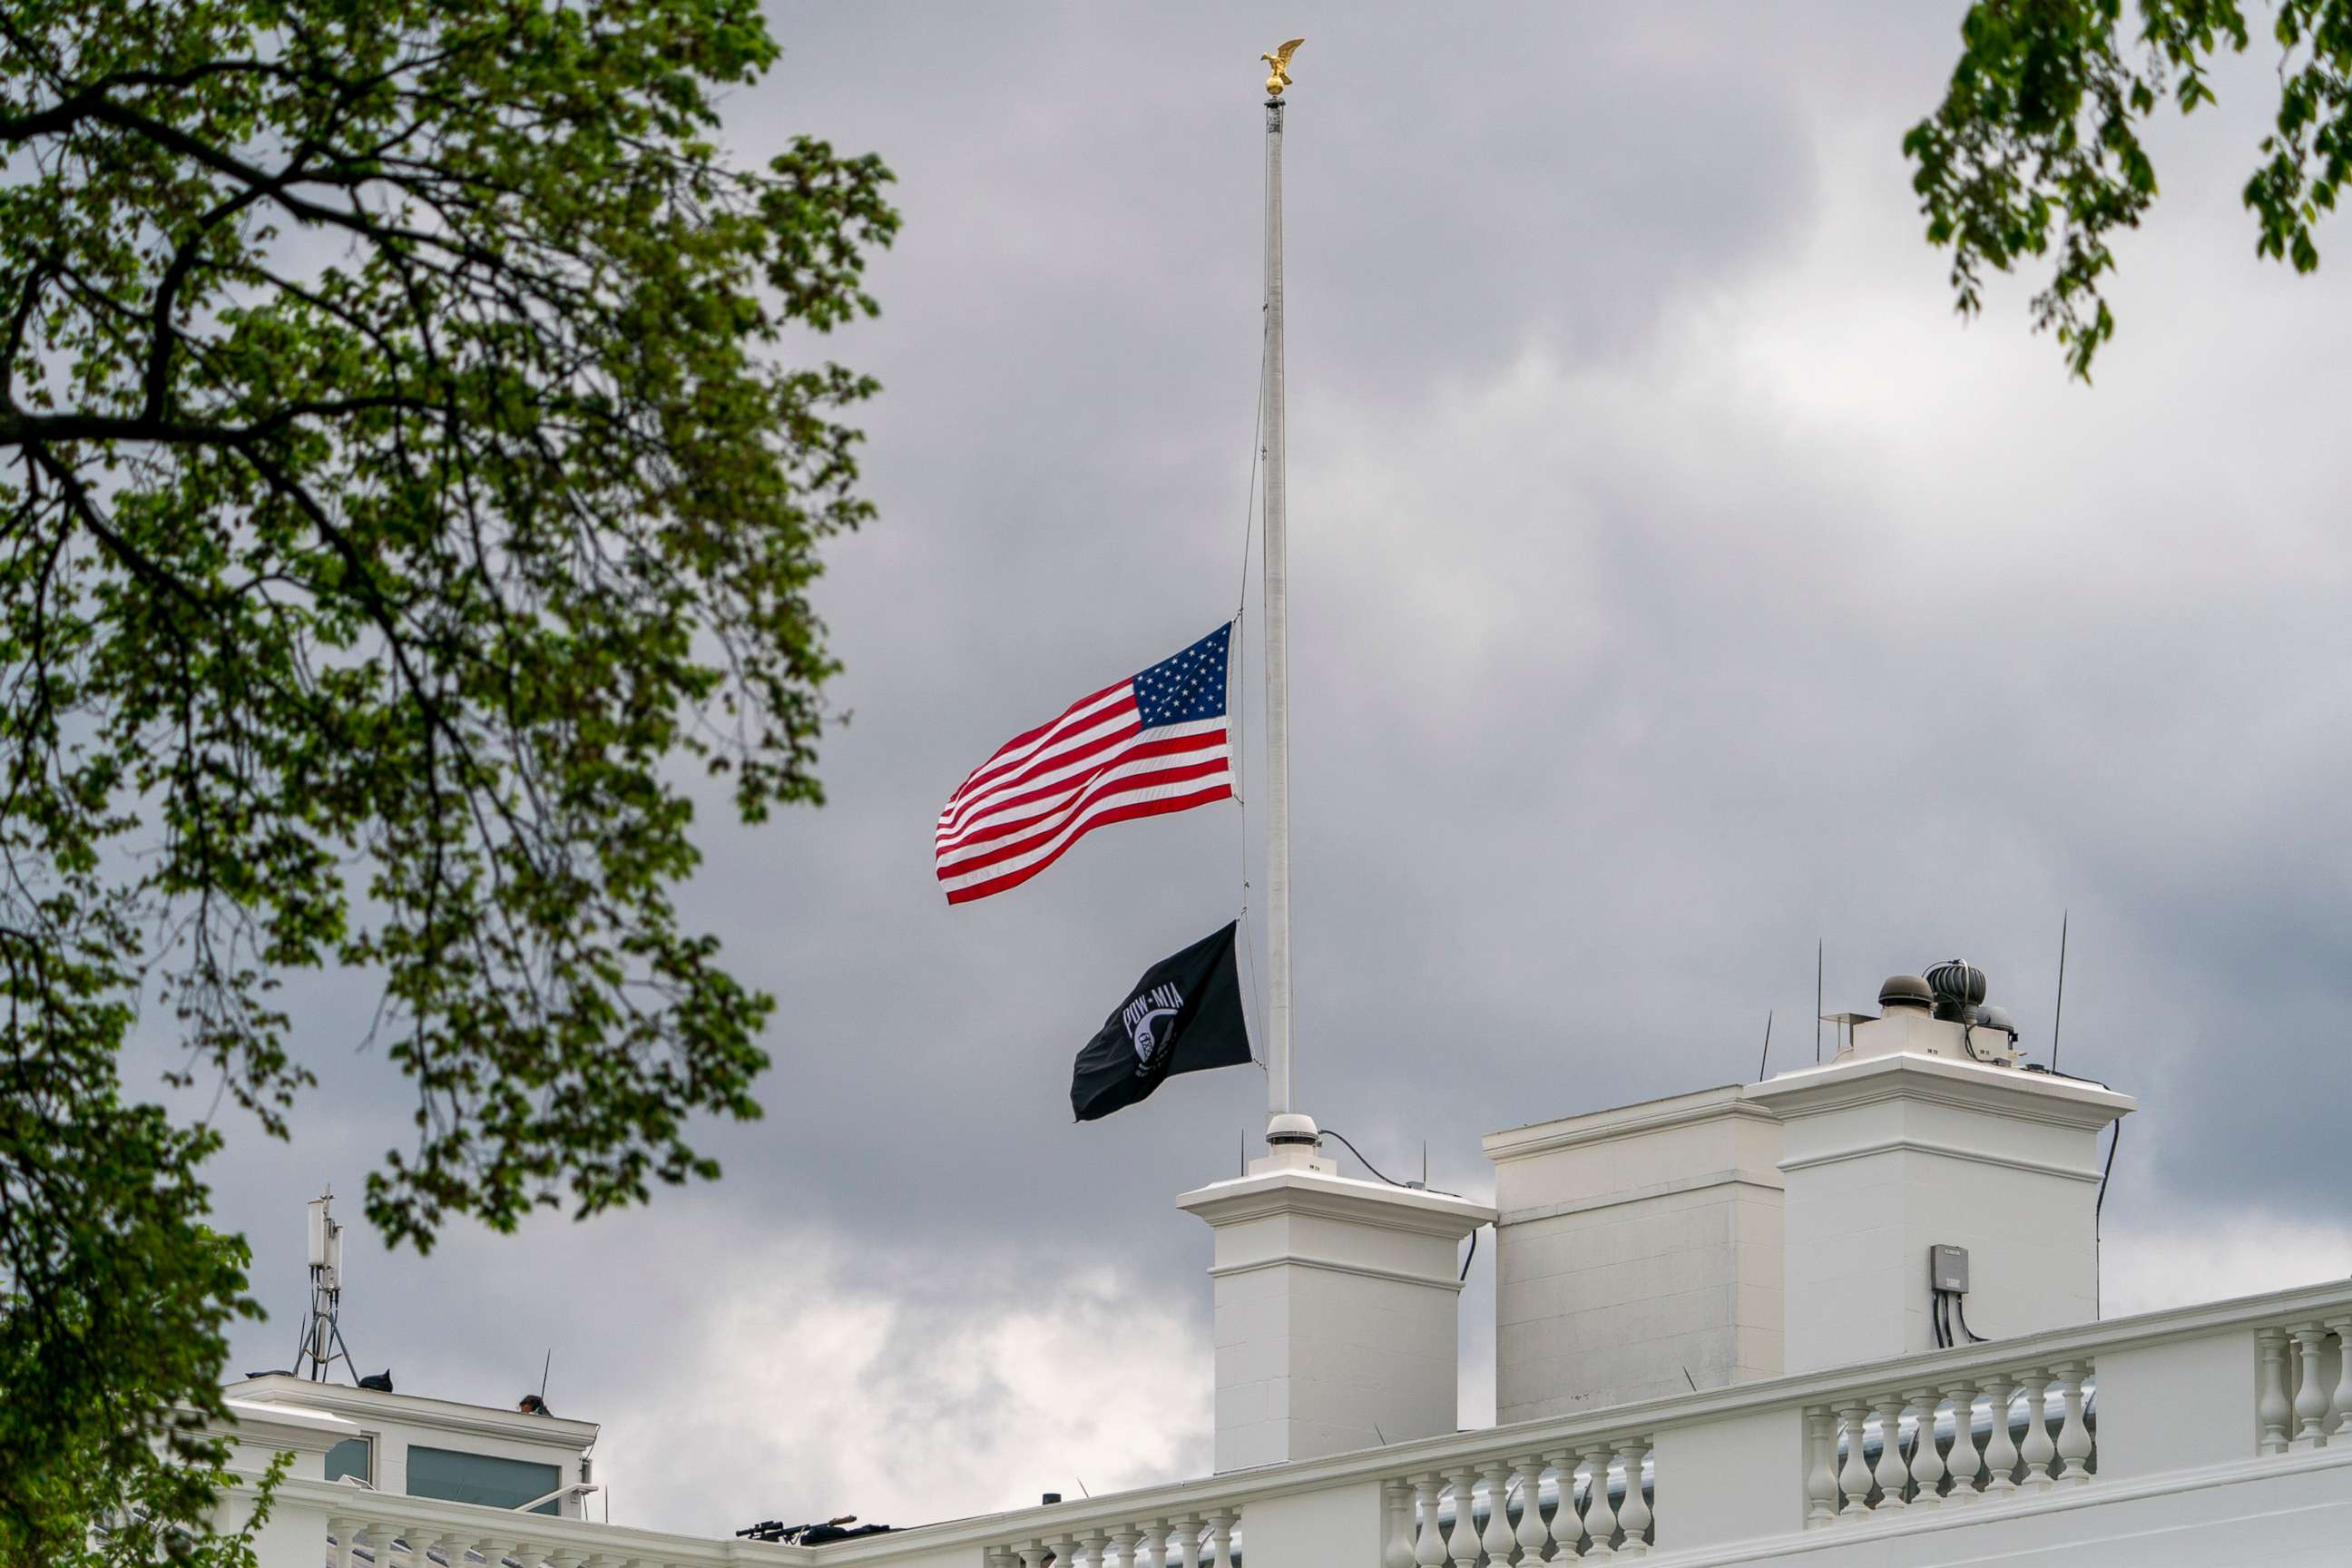 PHOTO: The American flag files at half-staff above the White House in Washington, D.C., April 16, 2021.